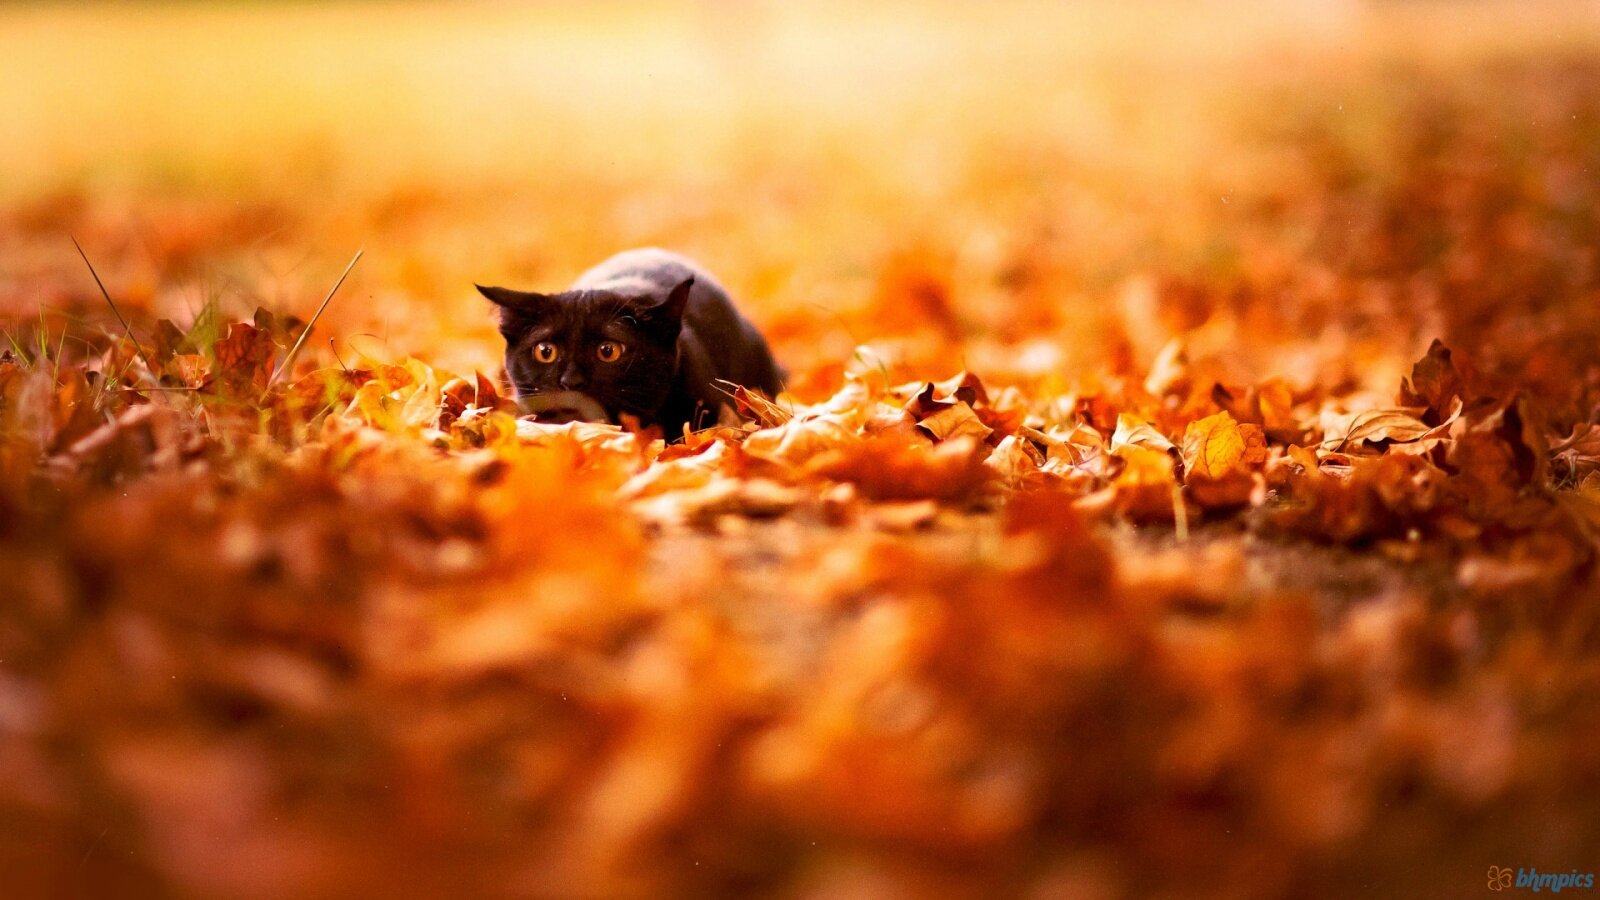 Cat-And-Autumn-Leaves